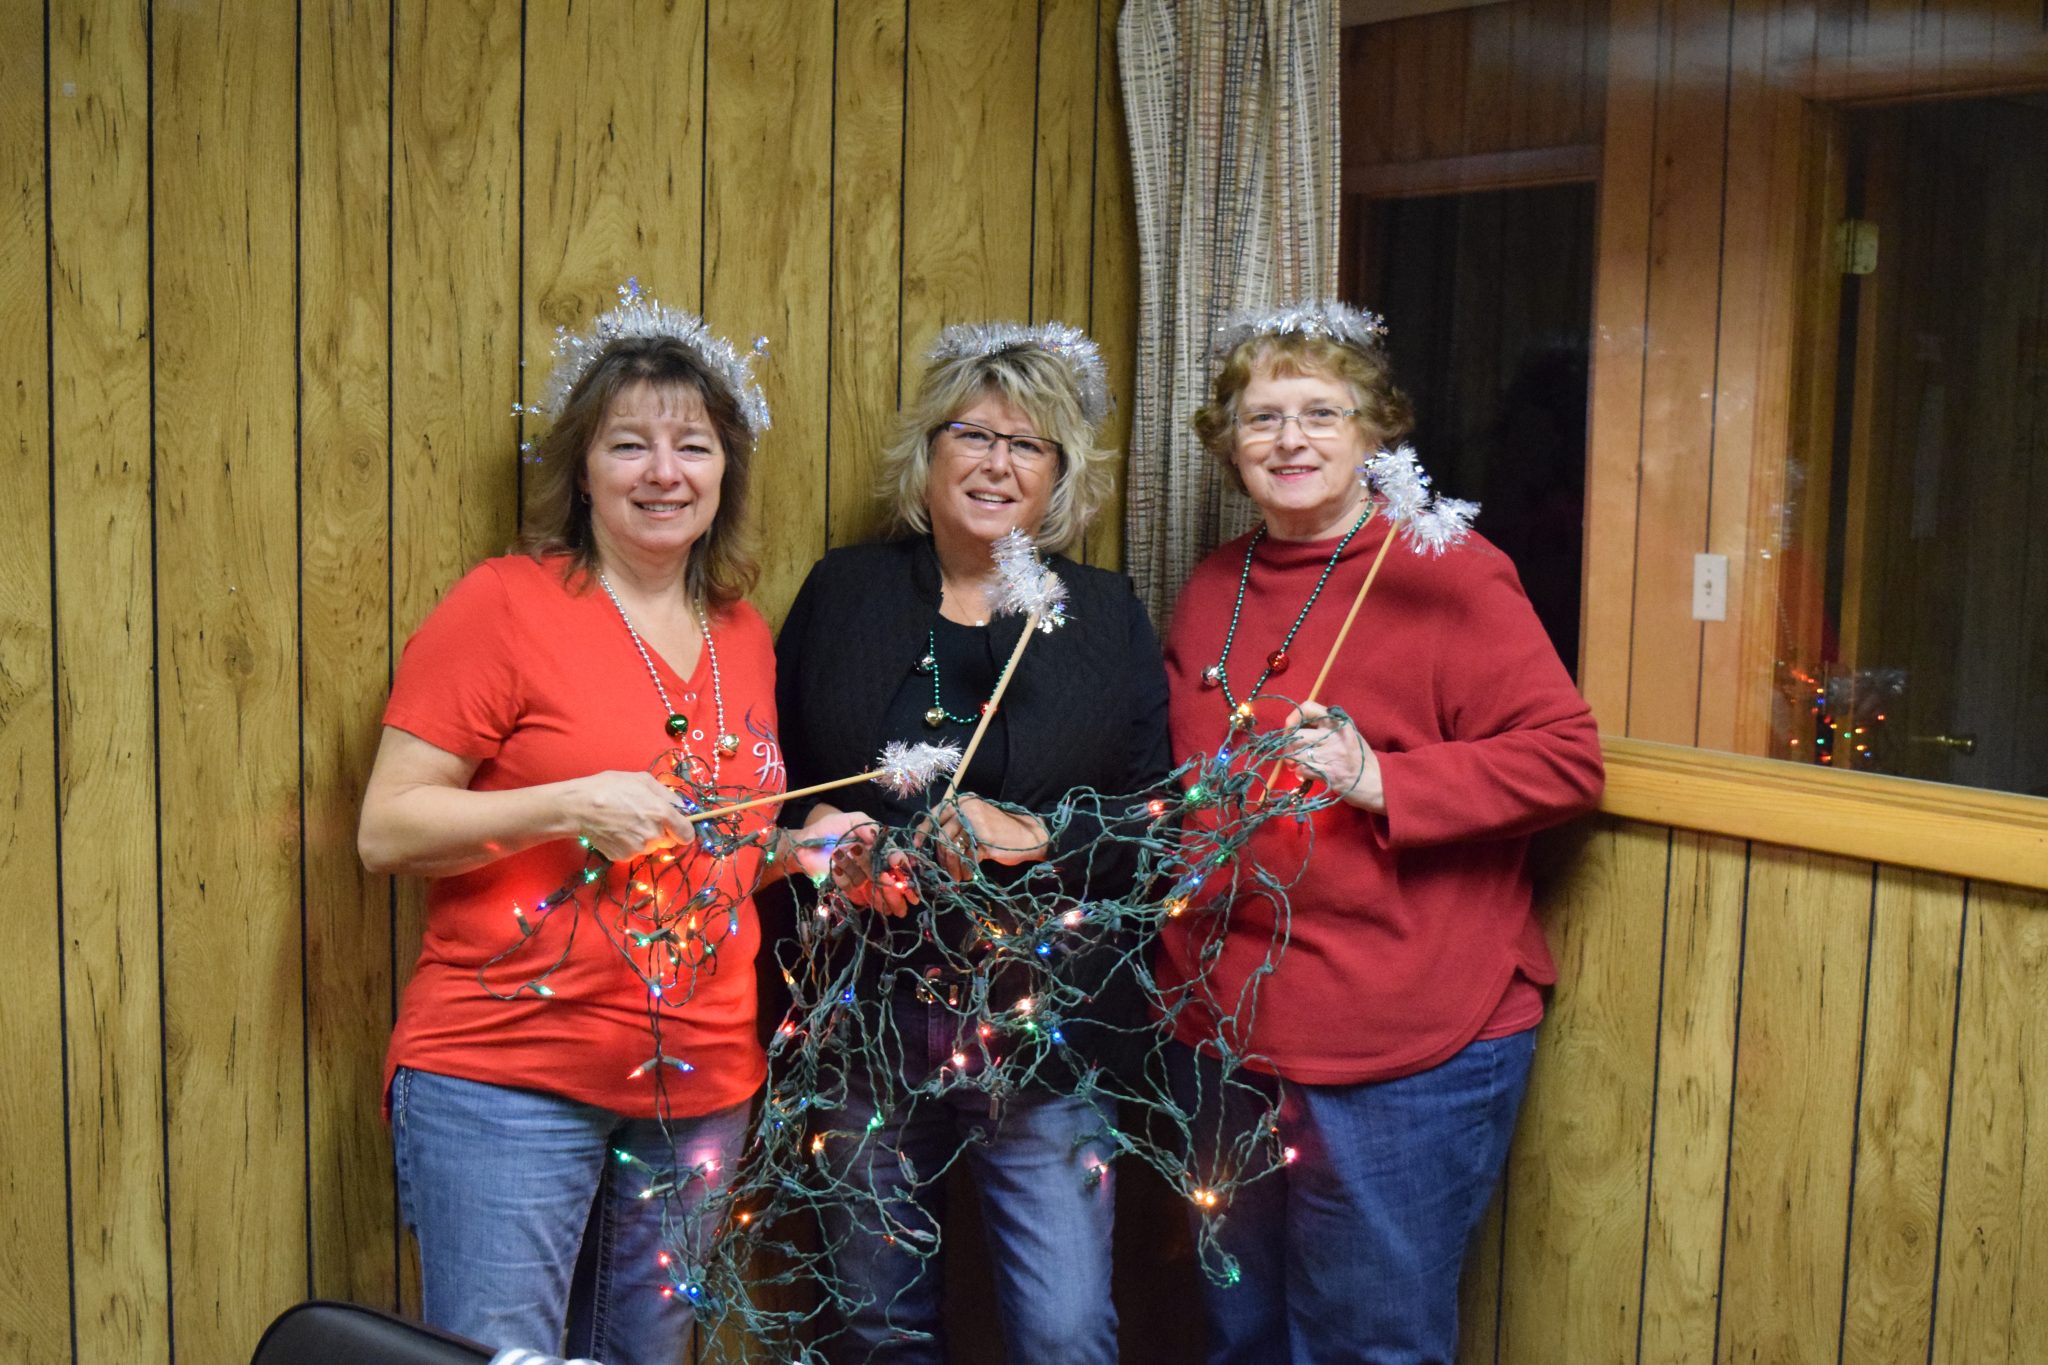 “Christmas Fairies” thank Tomahawk community after successful Hometown Christmas